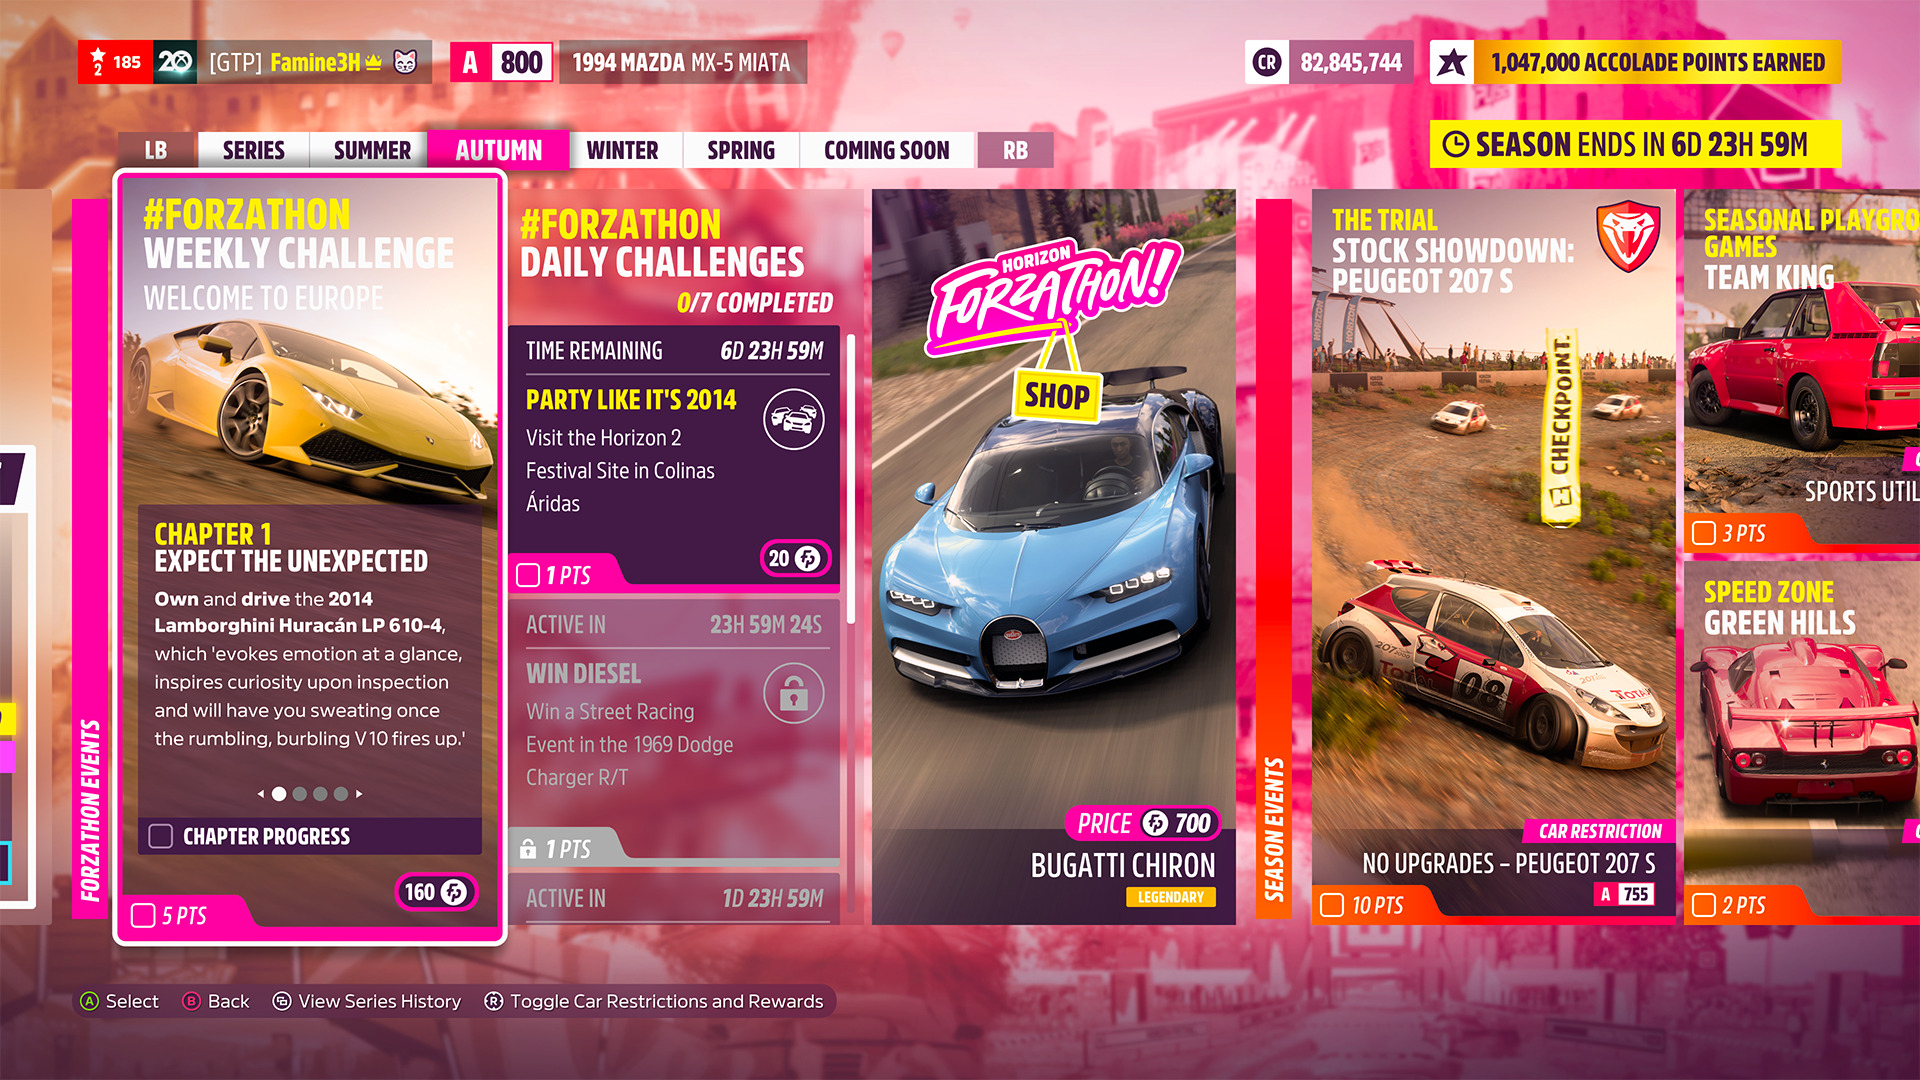 Forza Horizon 5 Was Developed In Three Years Instead Of Two, And